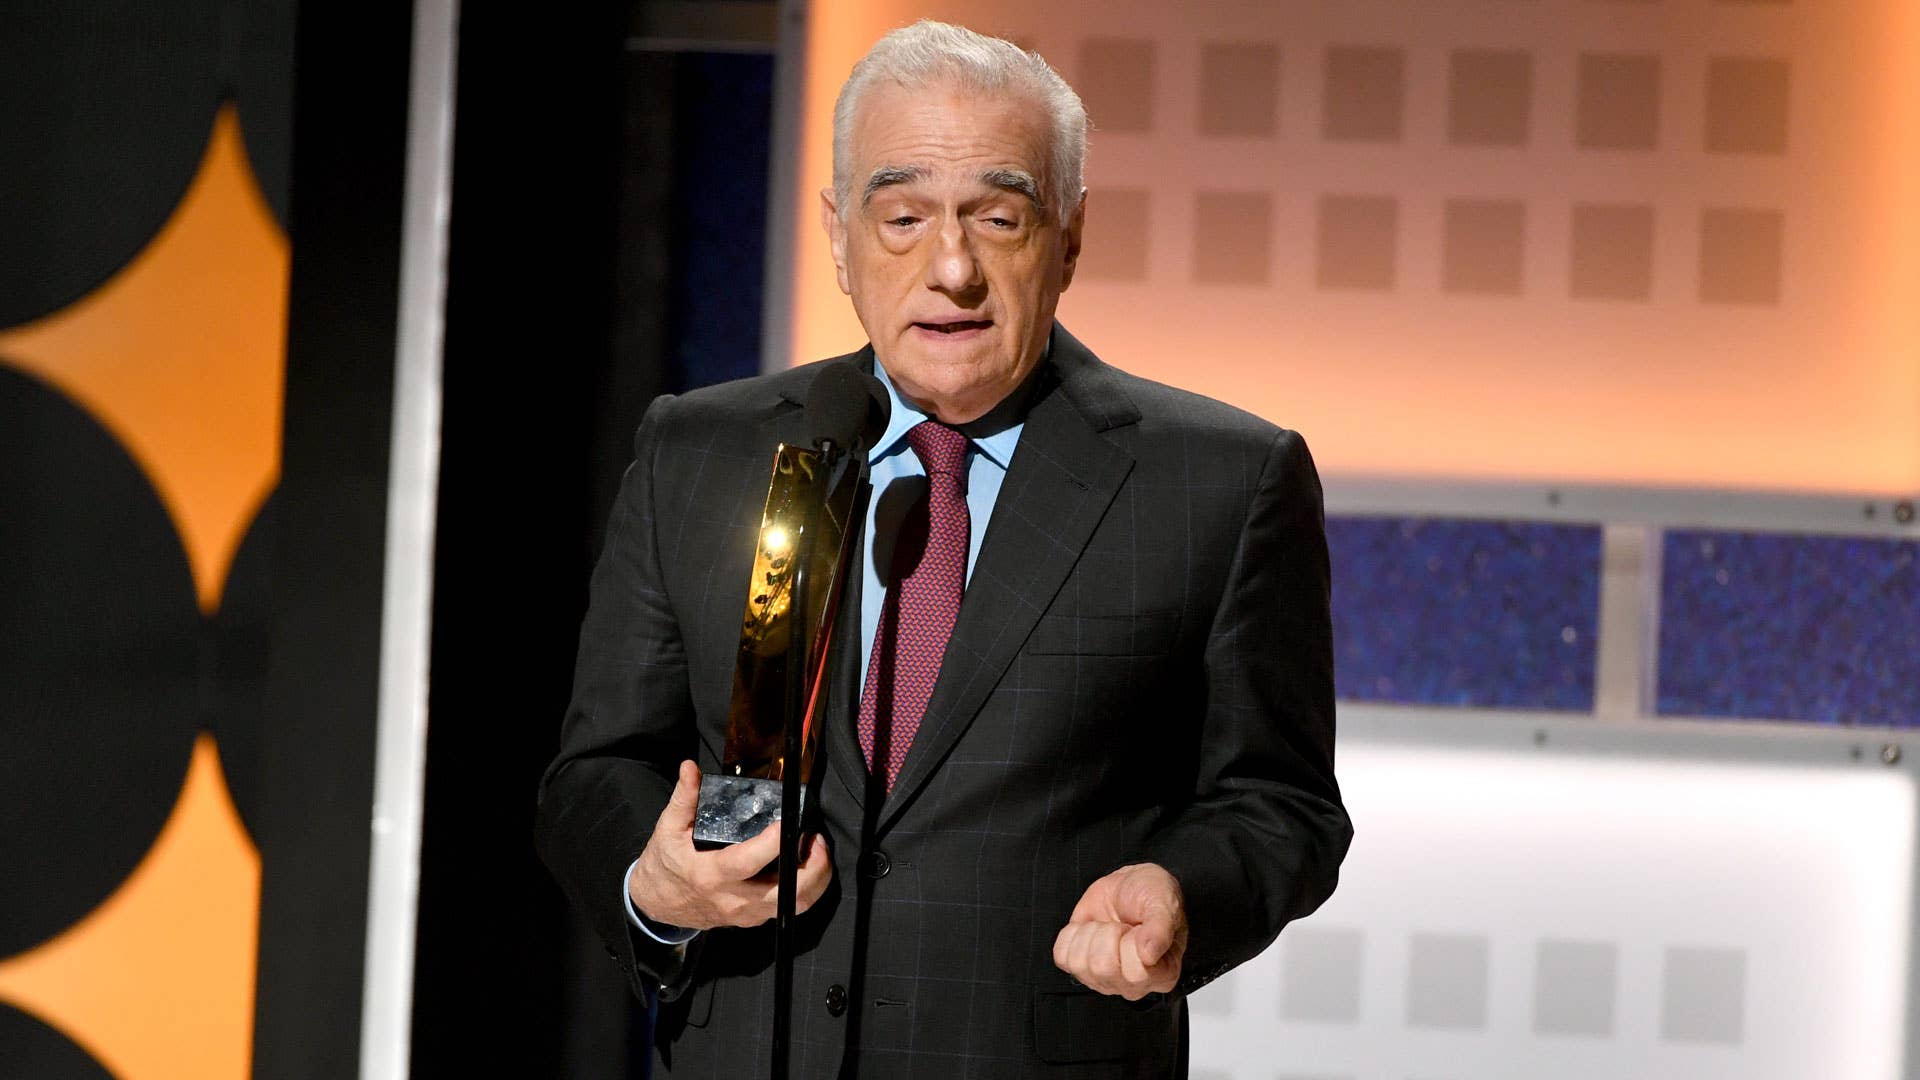 Martin Scorsese accepts an AARP Movie For Grownups Awards for 'The Irishman.'